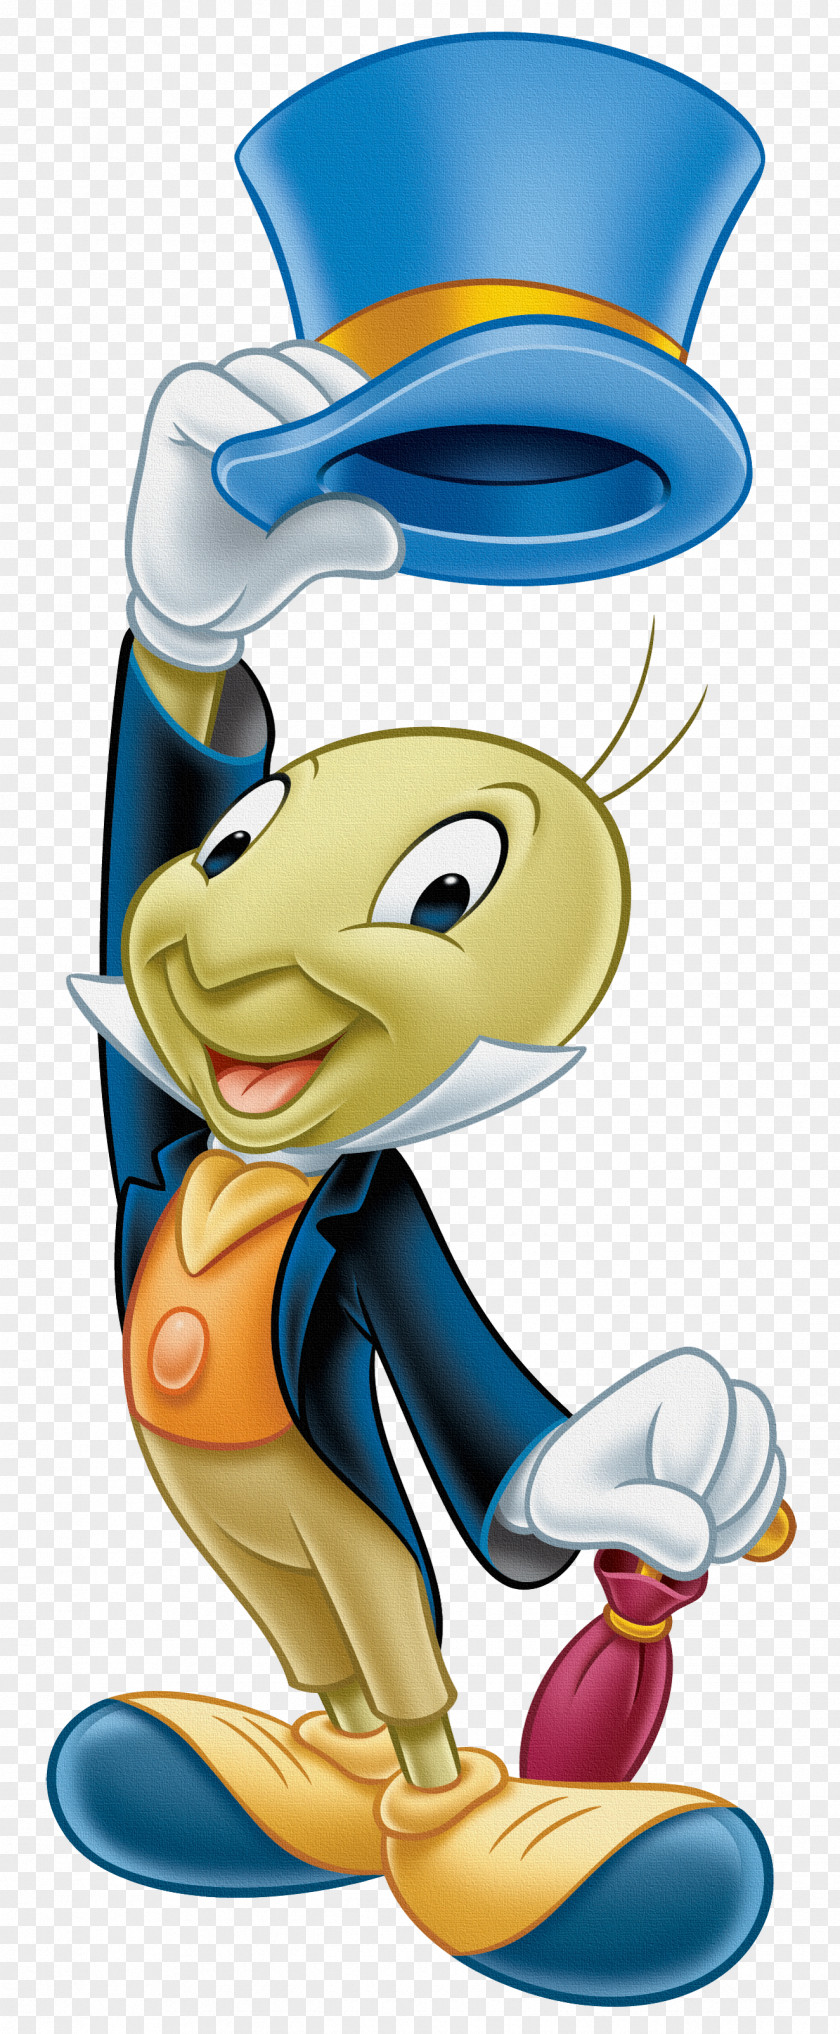 Disney Jiminy Cricket The Fairy With Turquoise Hair Talking Crickett Geppetto Pinocchio PNG